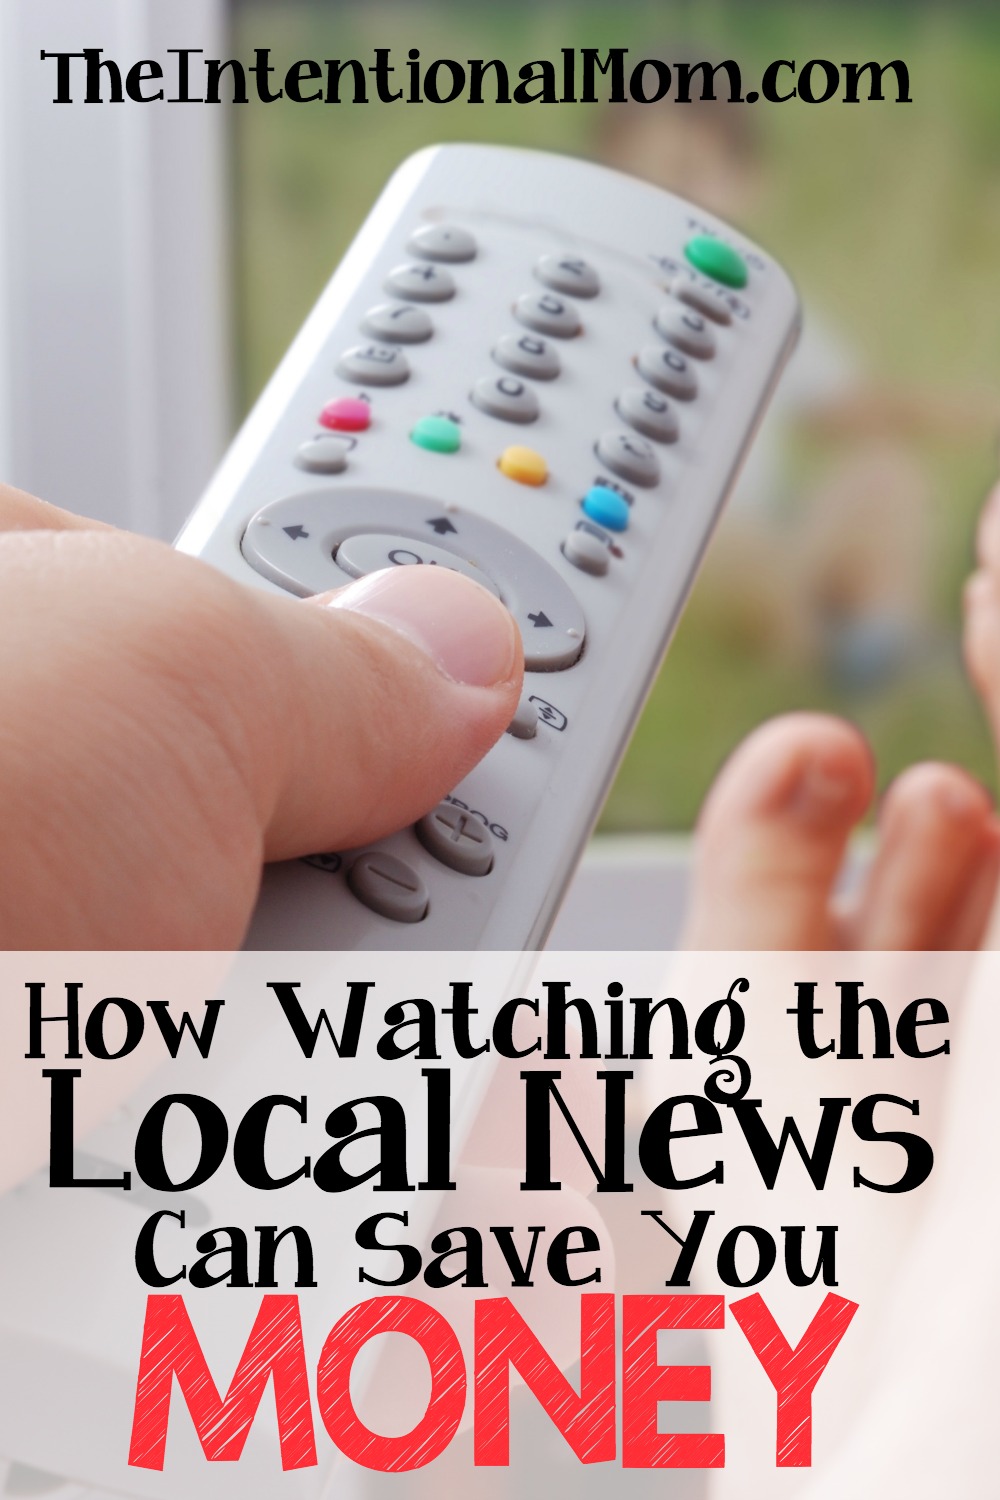 How Watching the Local News Can Save You Money